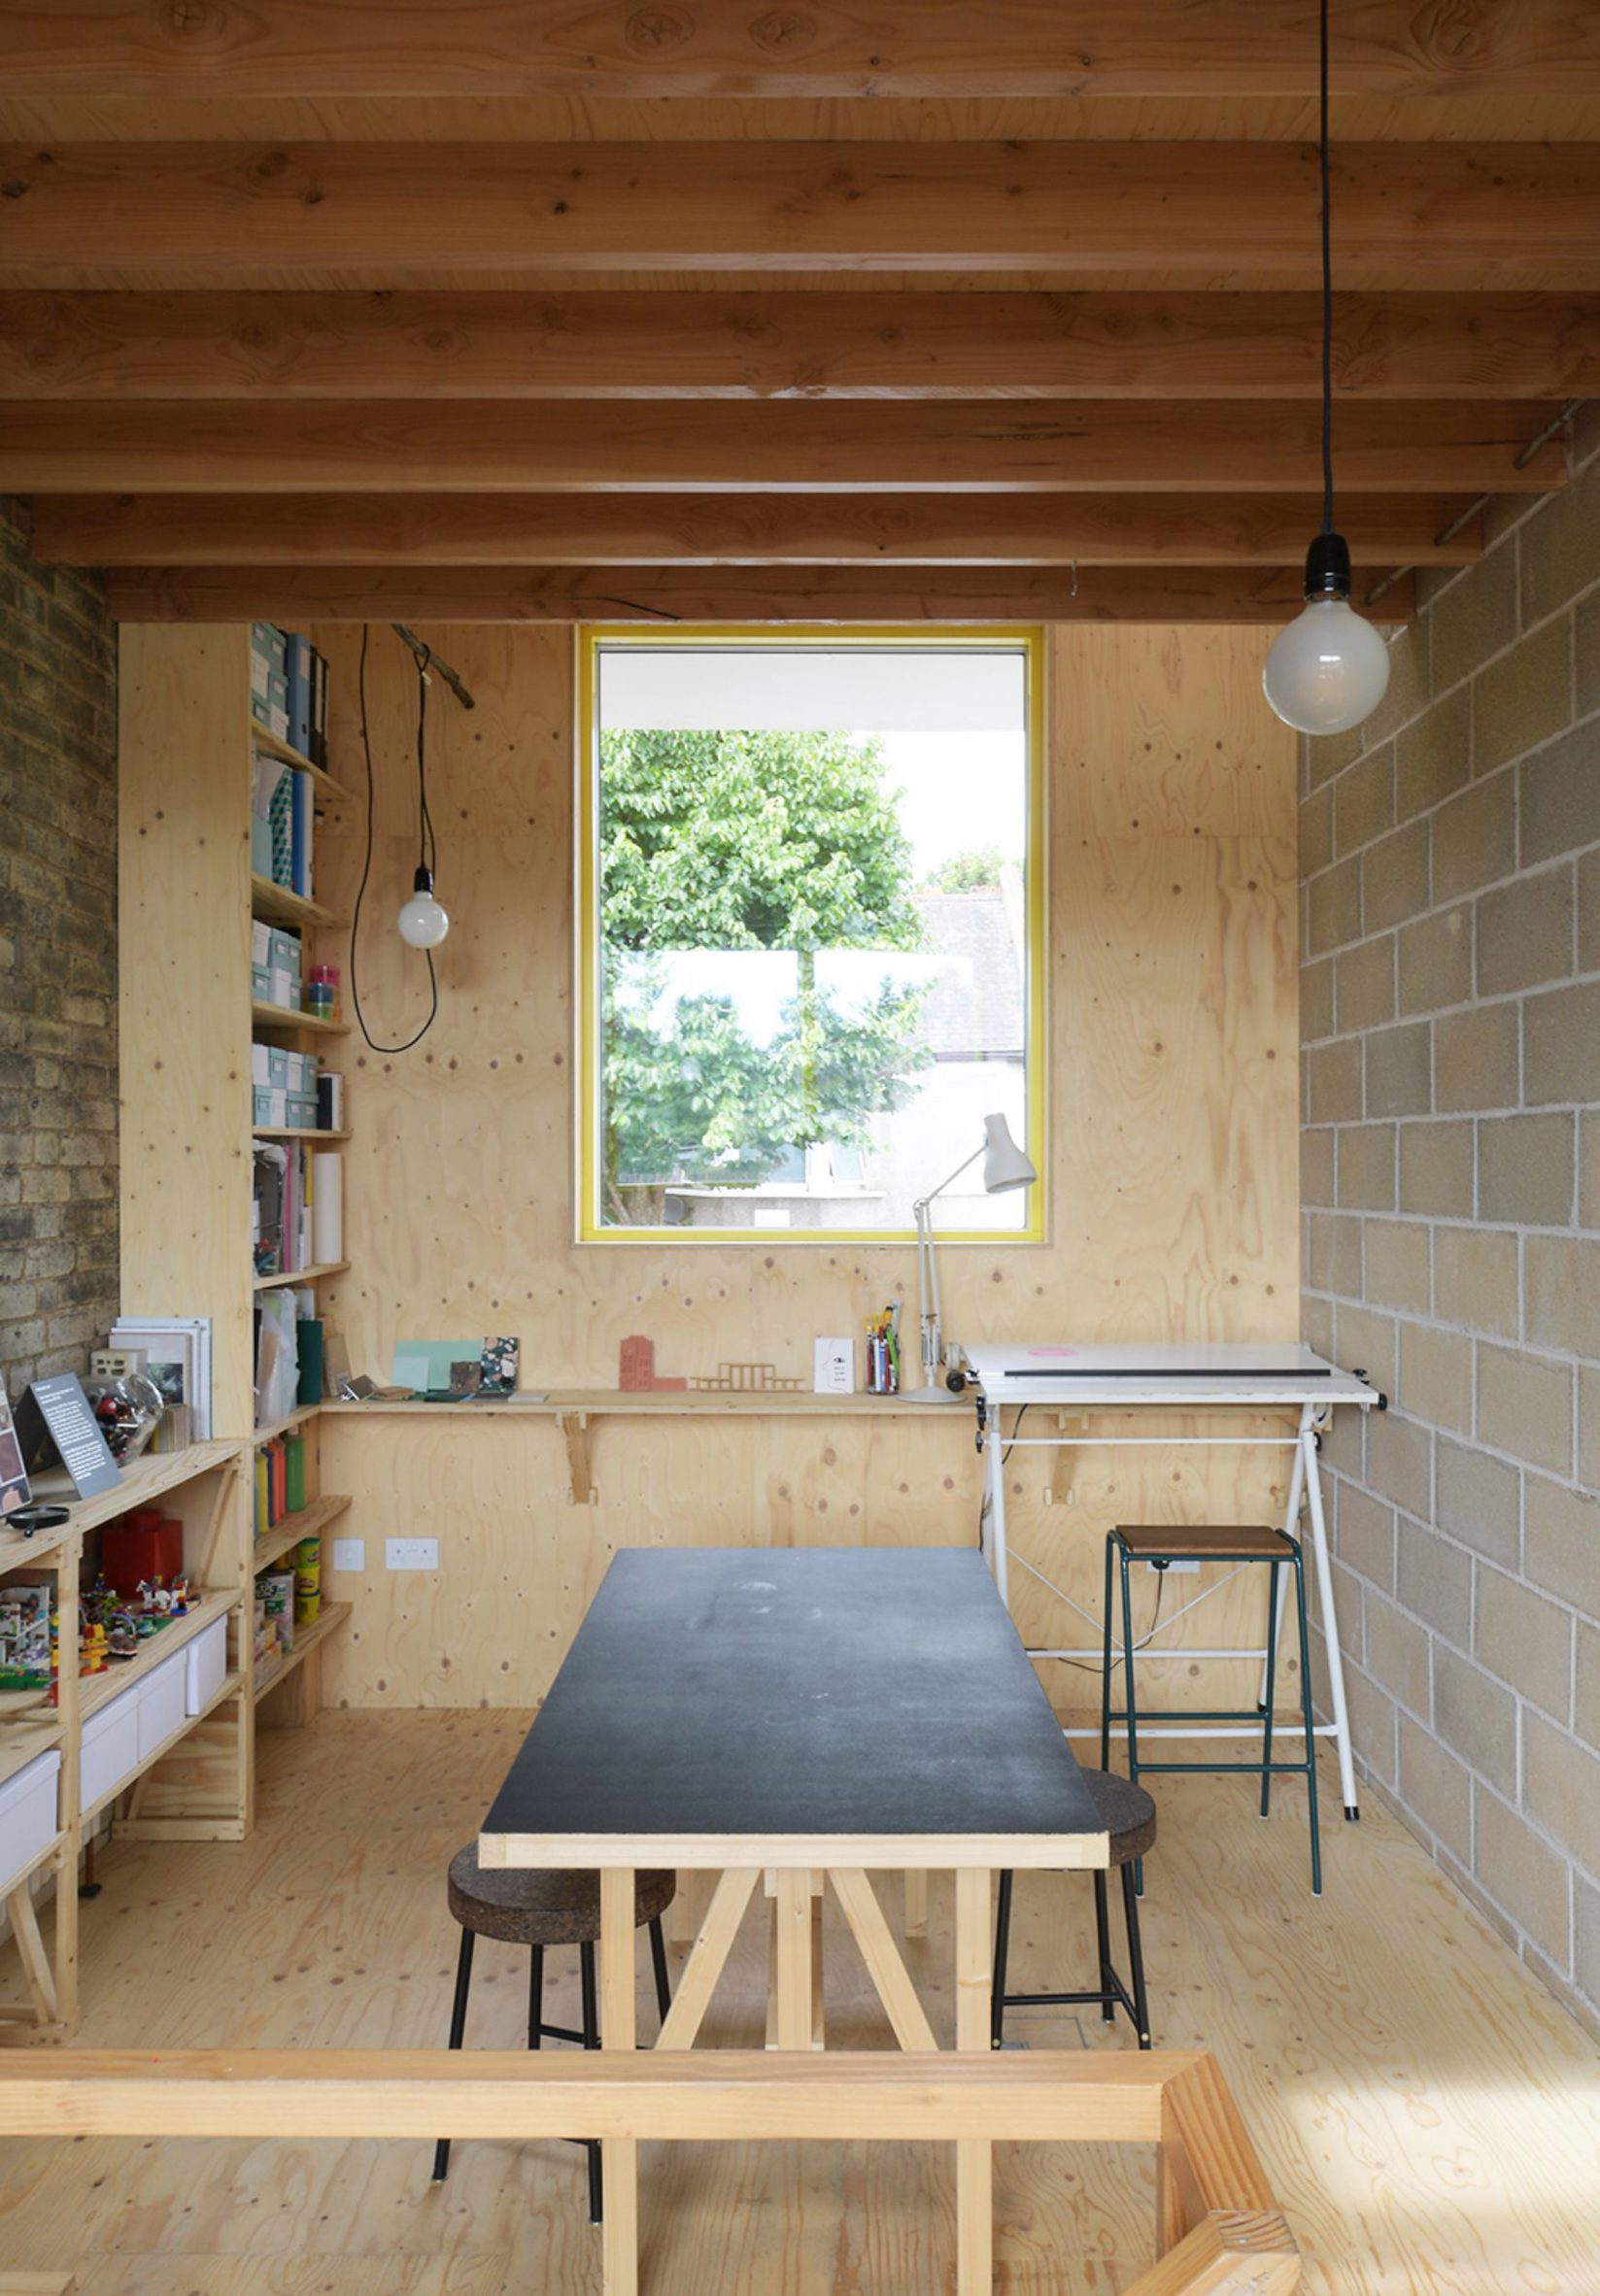 Interior image of a wooden studio space